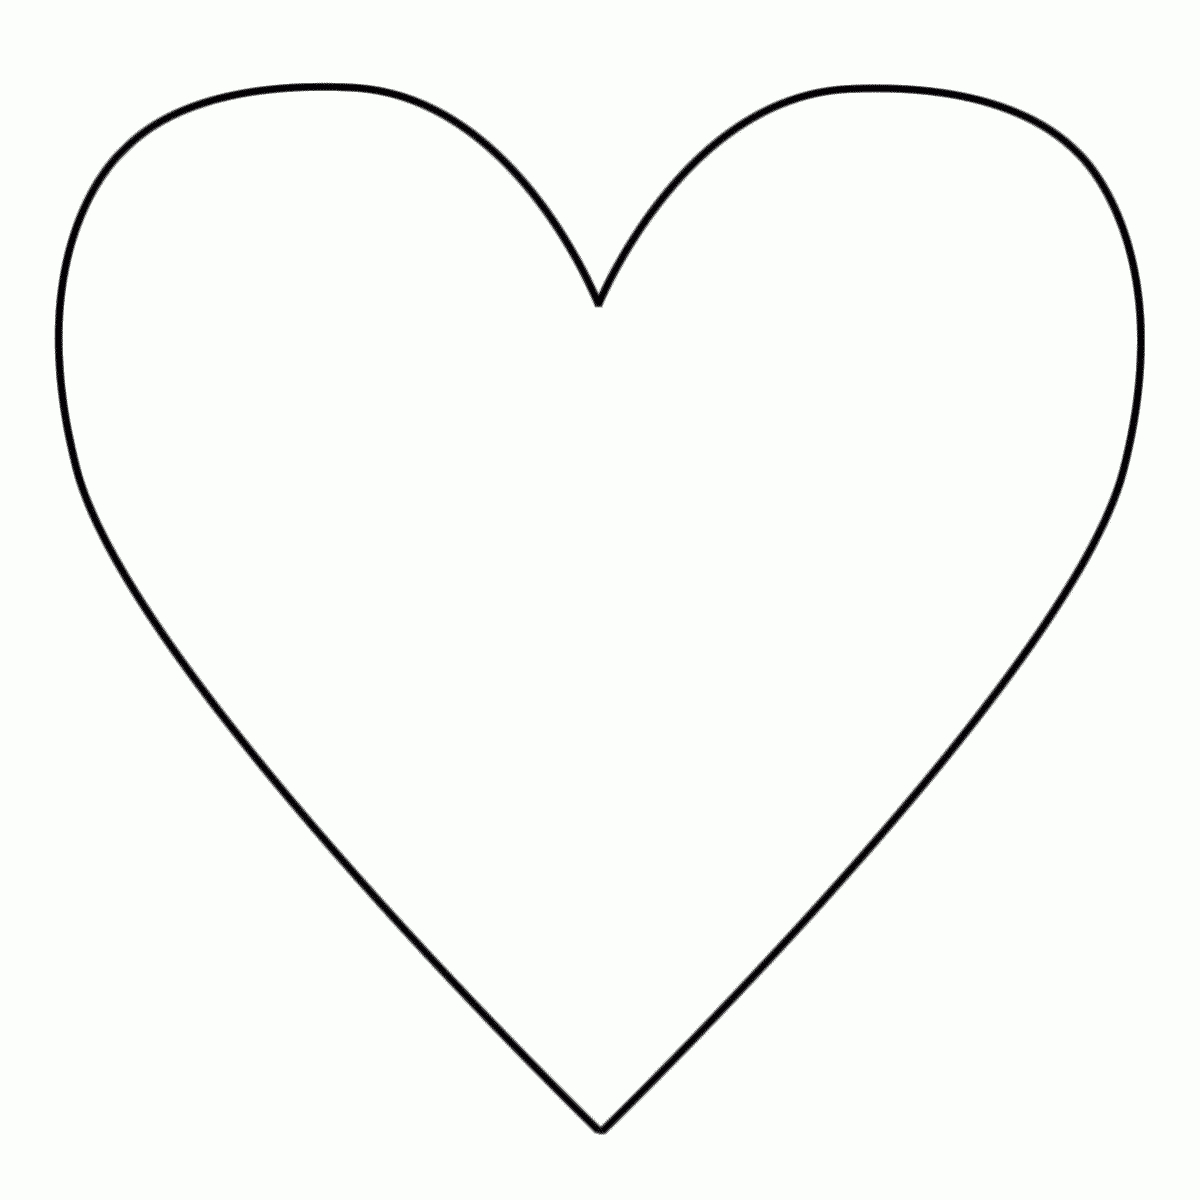 Free Printable Heart Coloring Pages For Kids | Girl Stuff | Heart - Free Printable Heart Coloring Pages